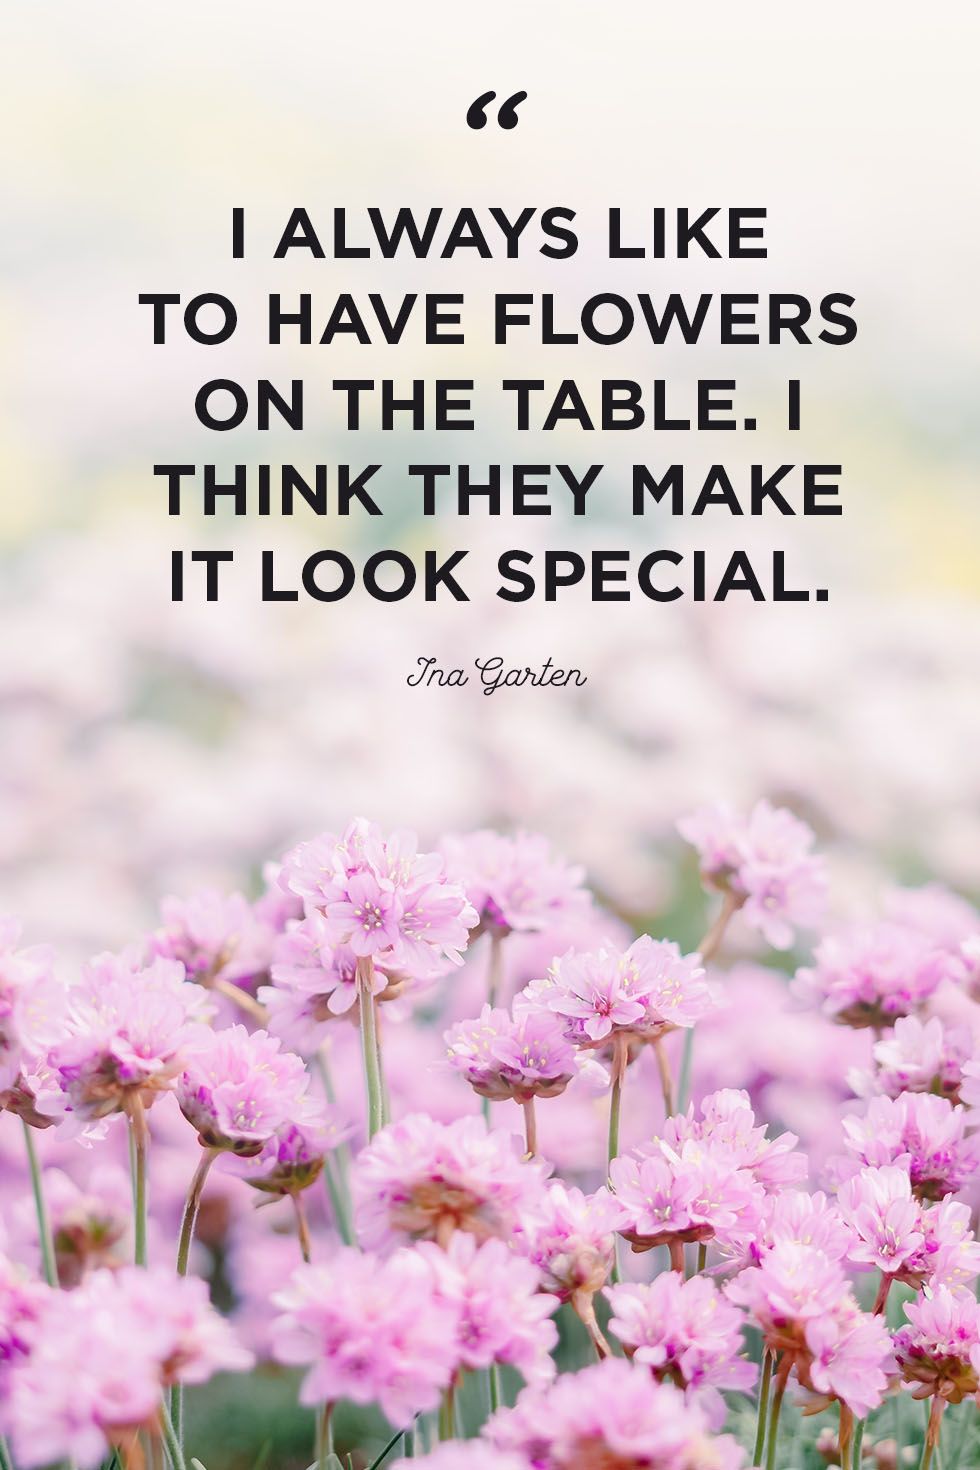 Life Quotes Related To Flowers